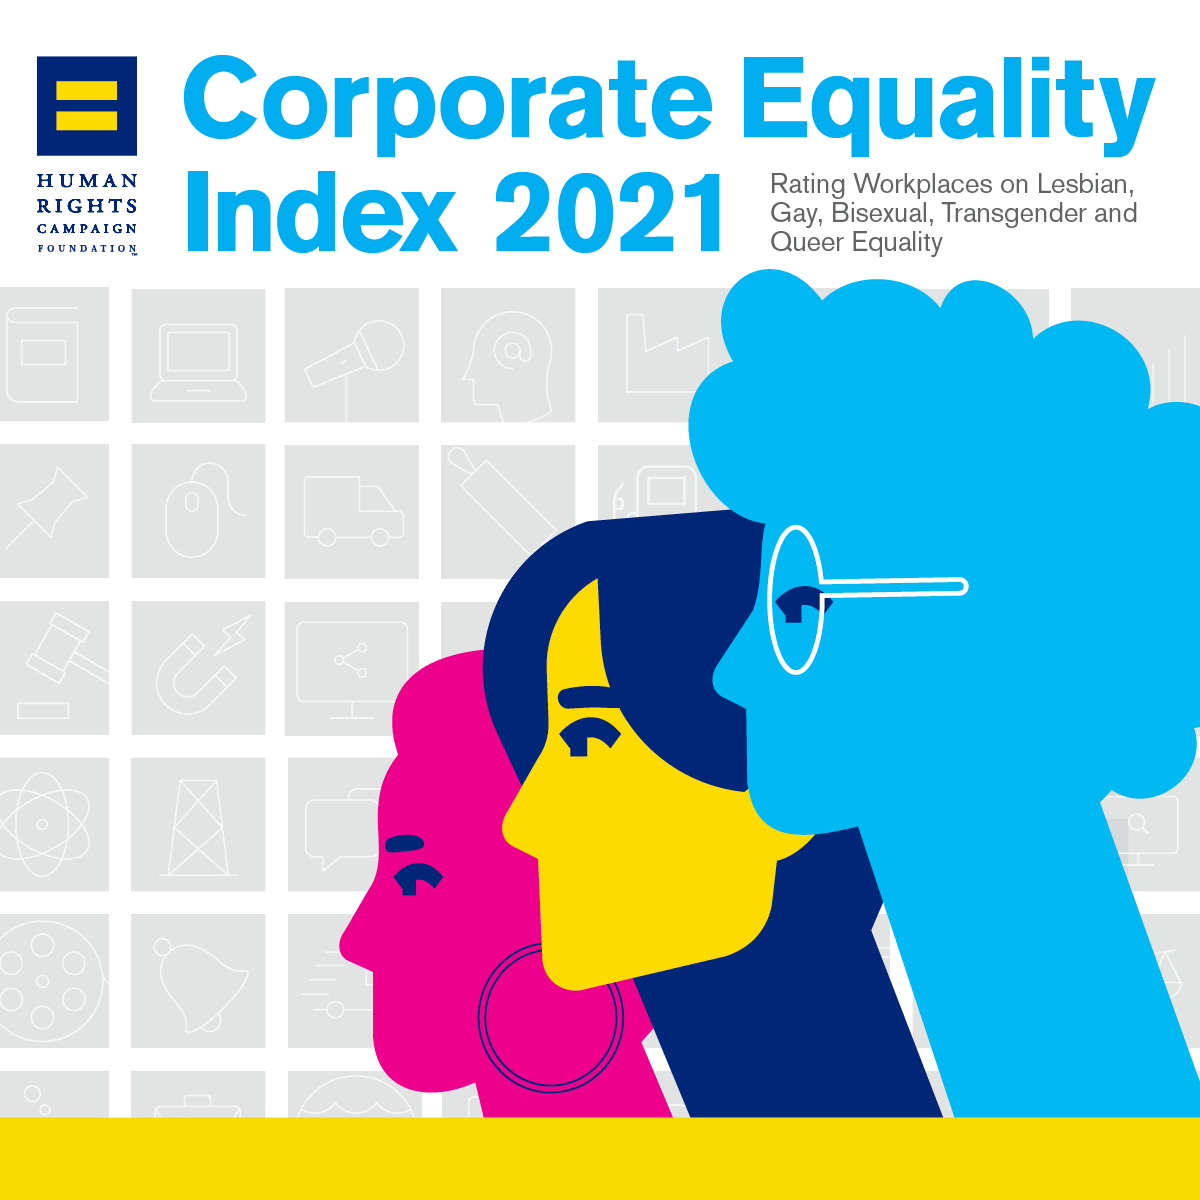 Corporate Equality Index 2021